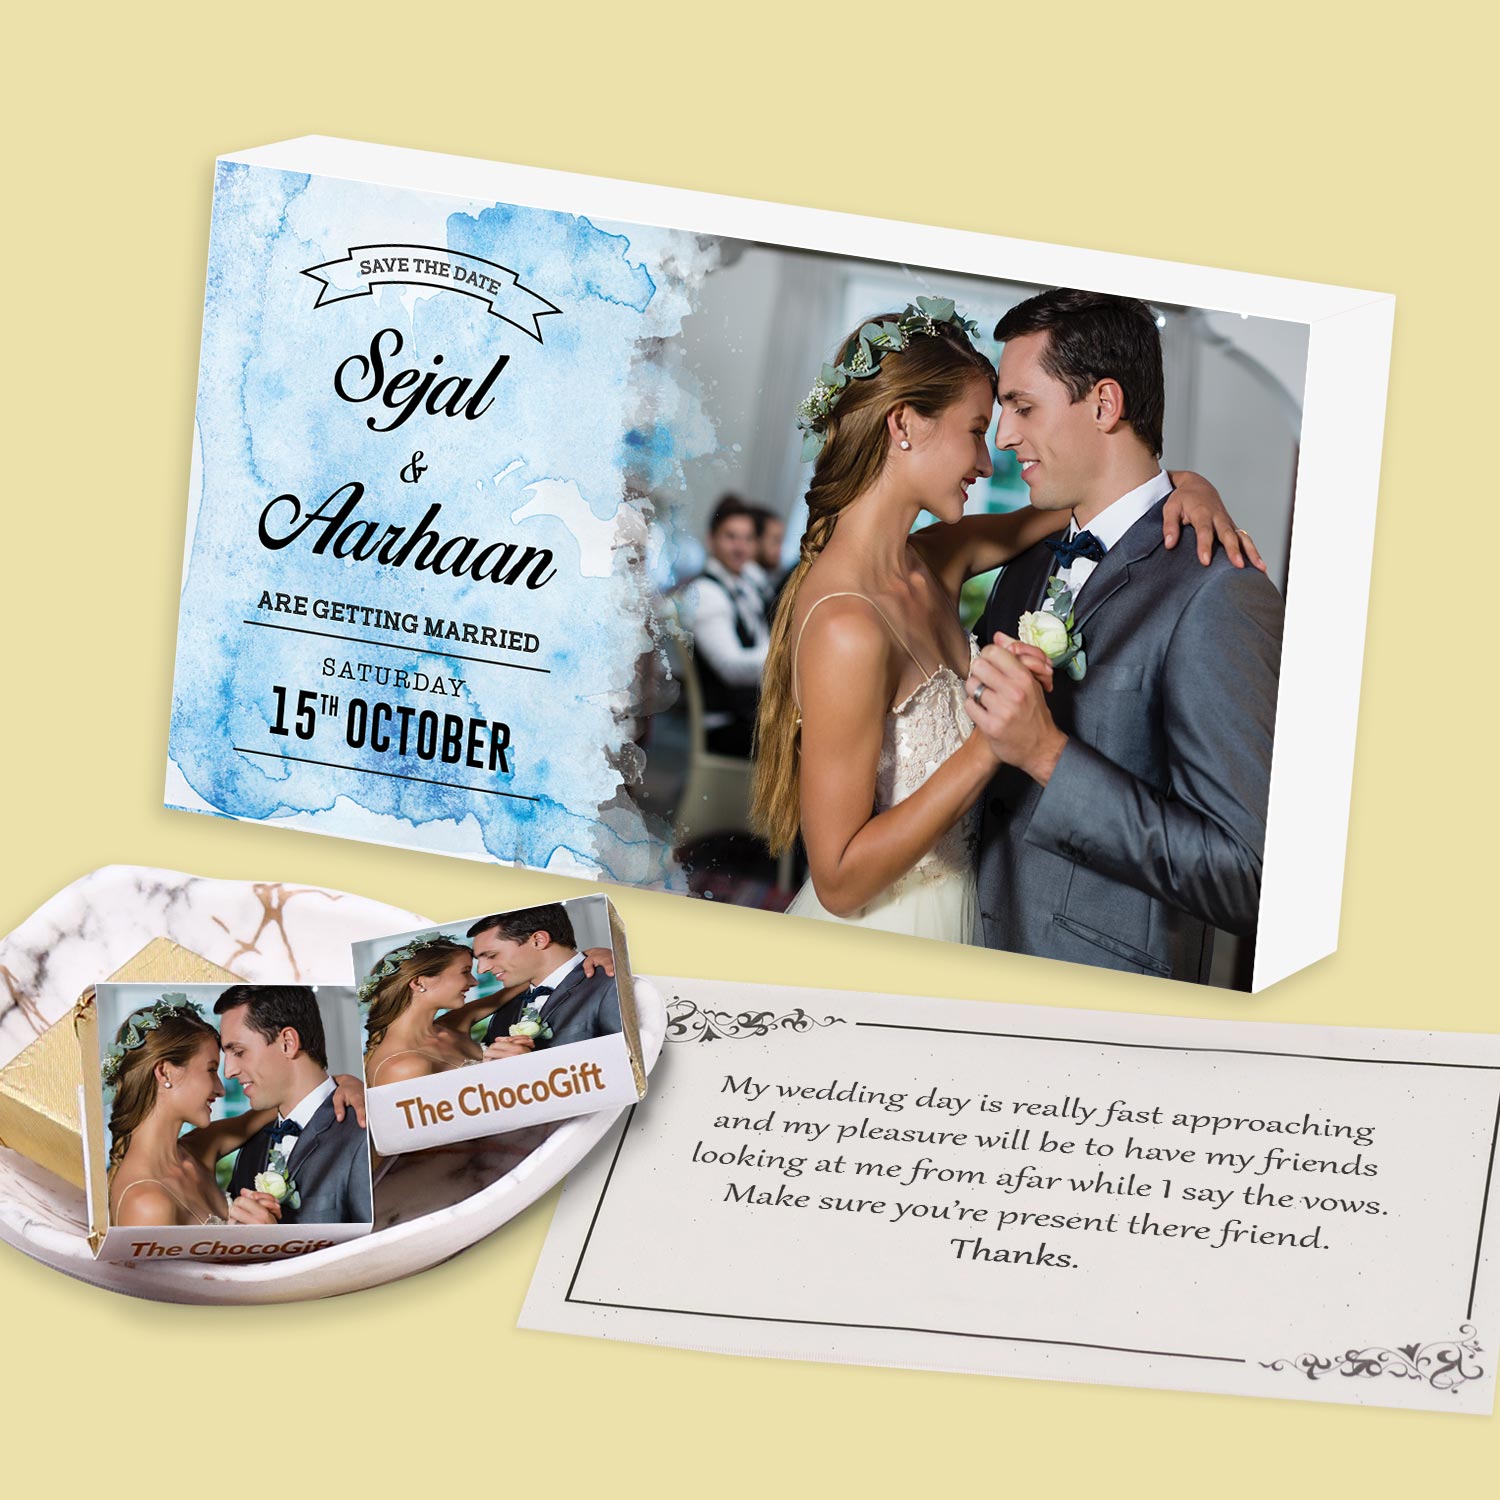 Save the date personalised wedding invitation